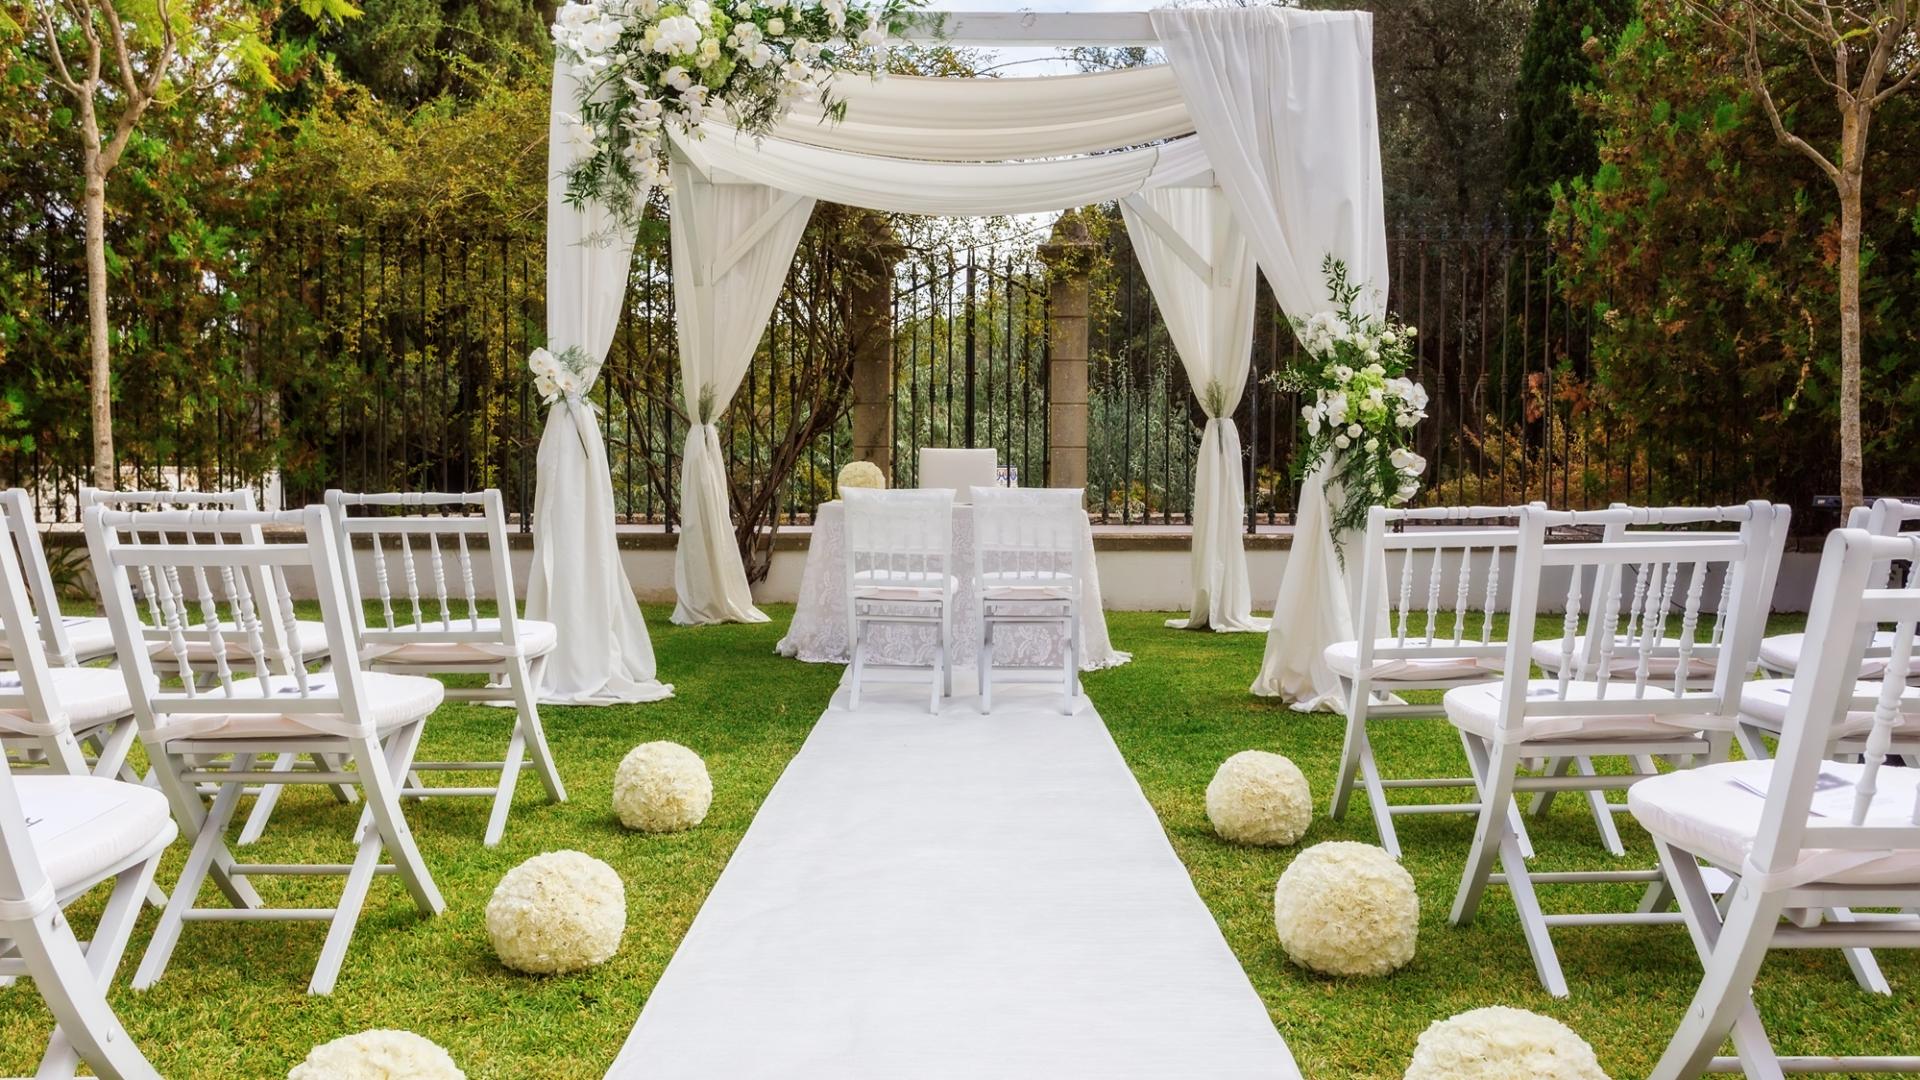 Outdoor Wedding Venues for Hire in London